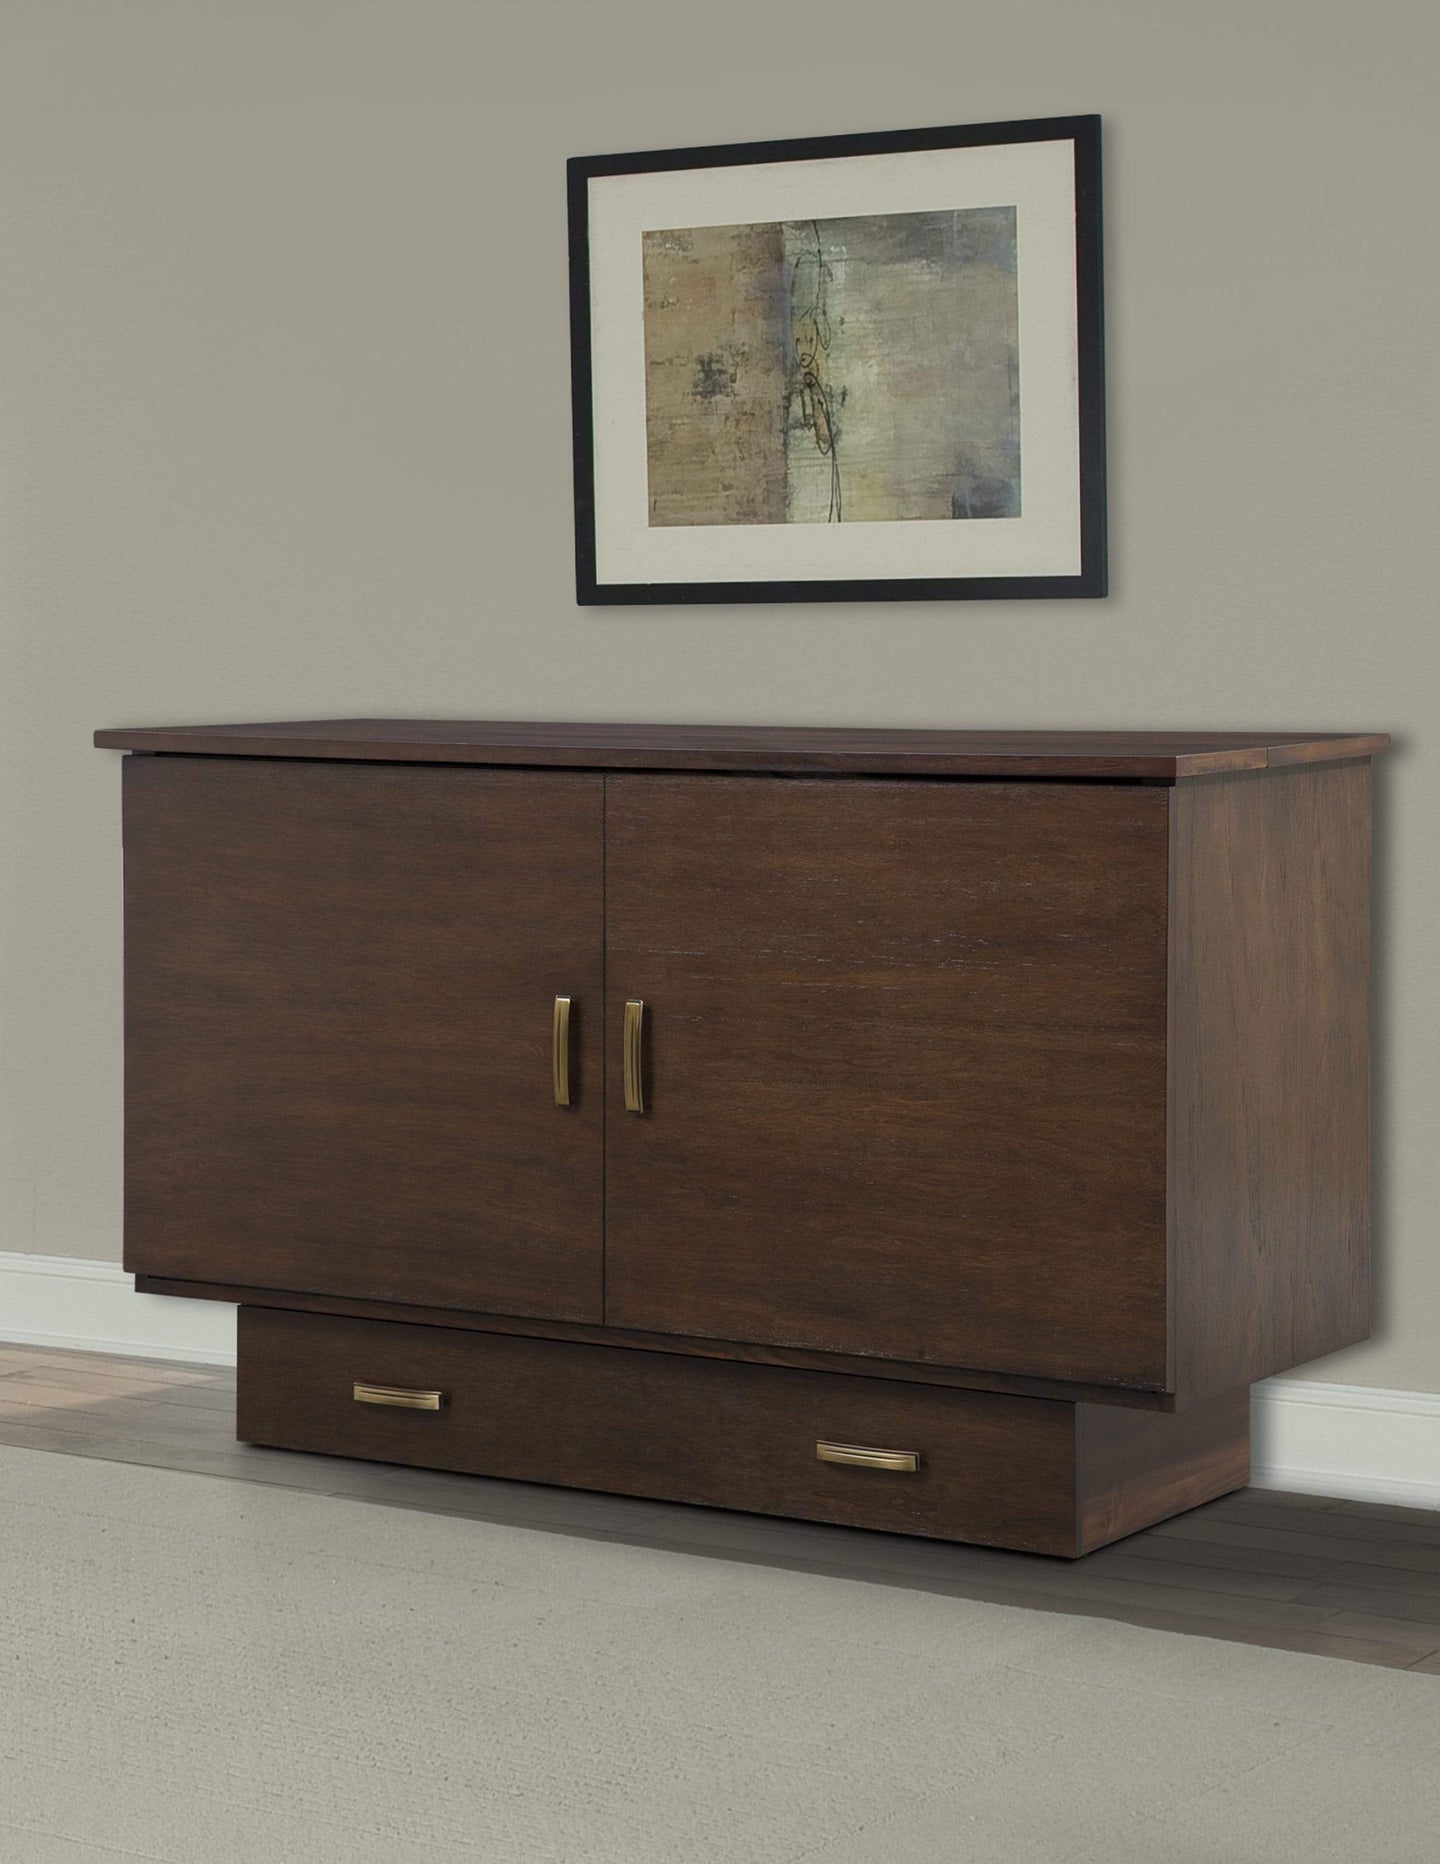 Arason Pekoe Creden zzz Cabinet Bed with Brown Natural Wood Finish